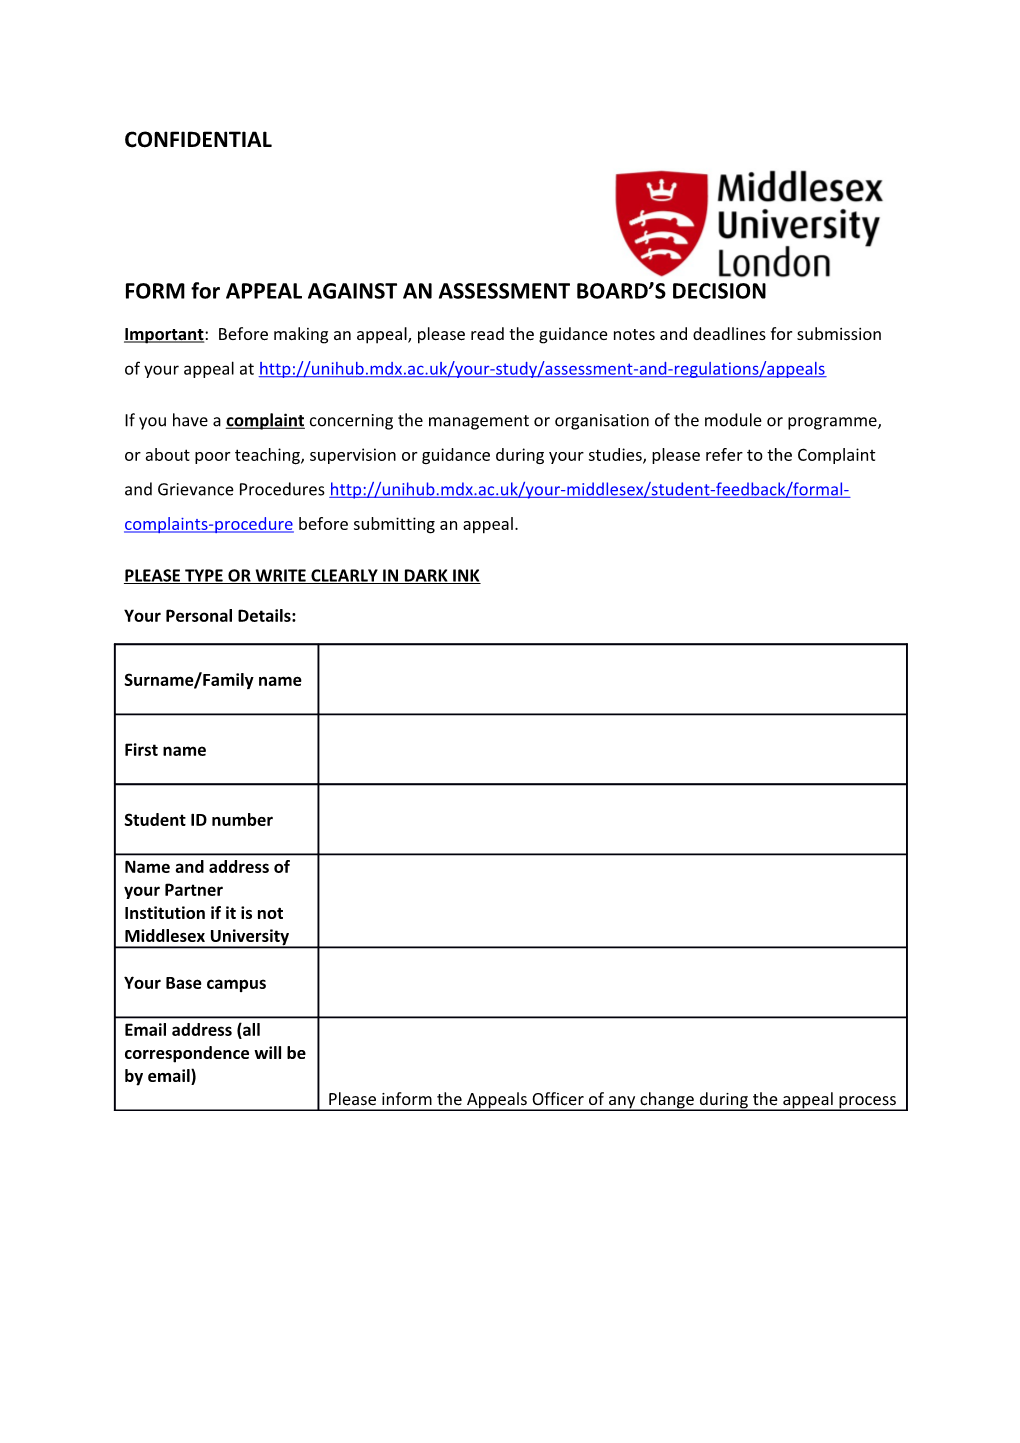 FORM for APPEAL AGAINST an ASSESSMENT BOARD S DECISION